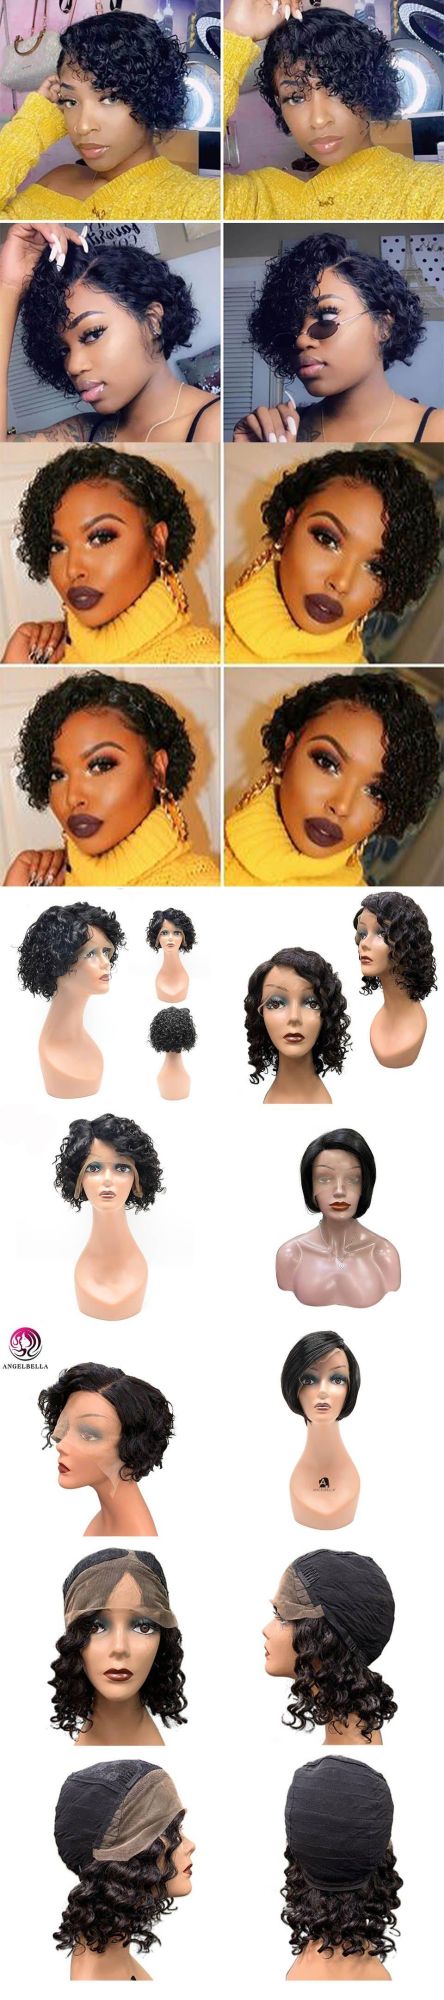 Peruvian Cuticle Aligned Hair T Side Part 13X4X1 T Side Part Full HD Lace Front Human Hair Machine Made Short Bob Wigs